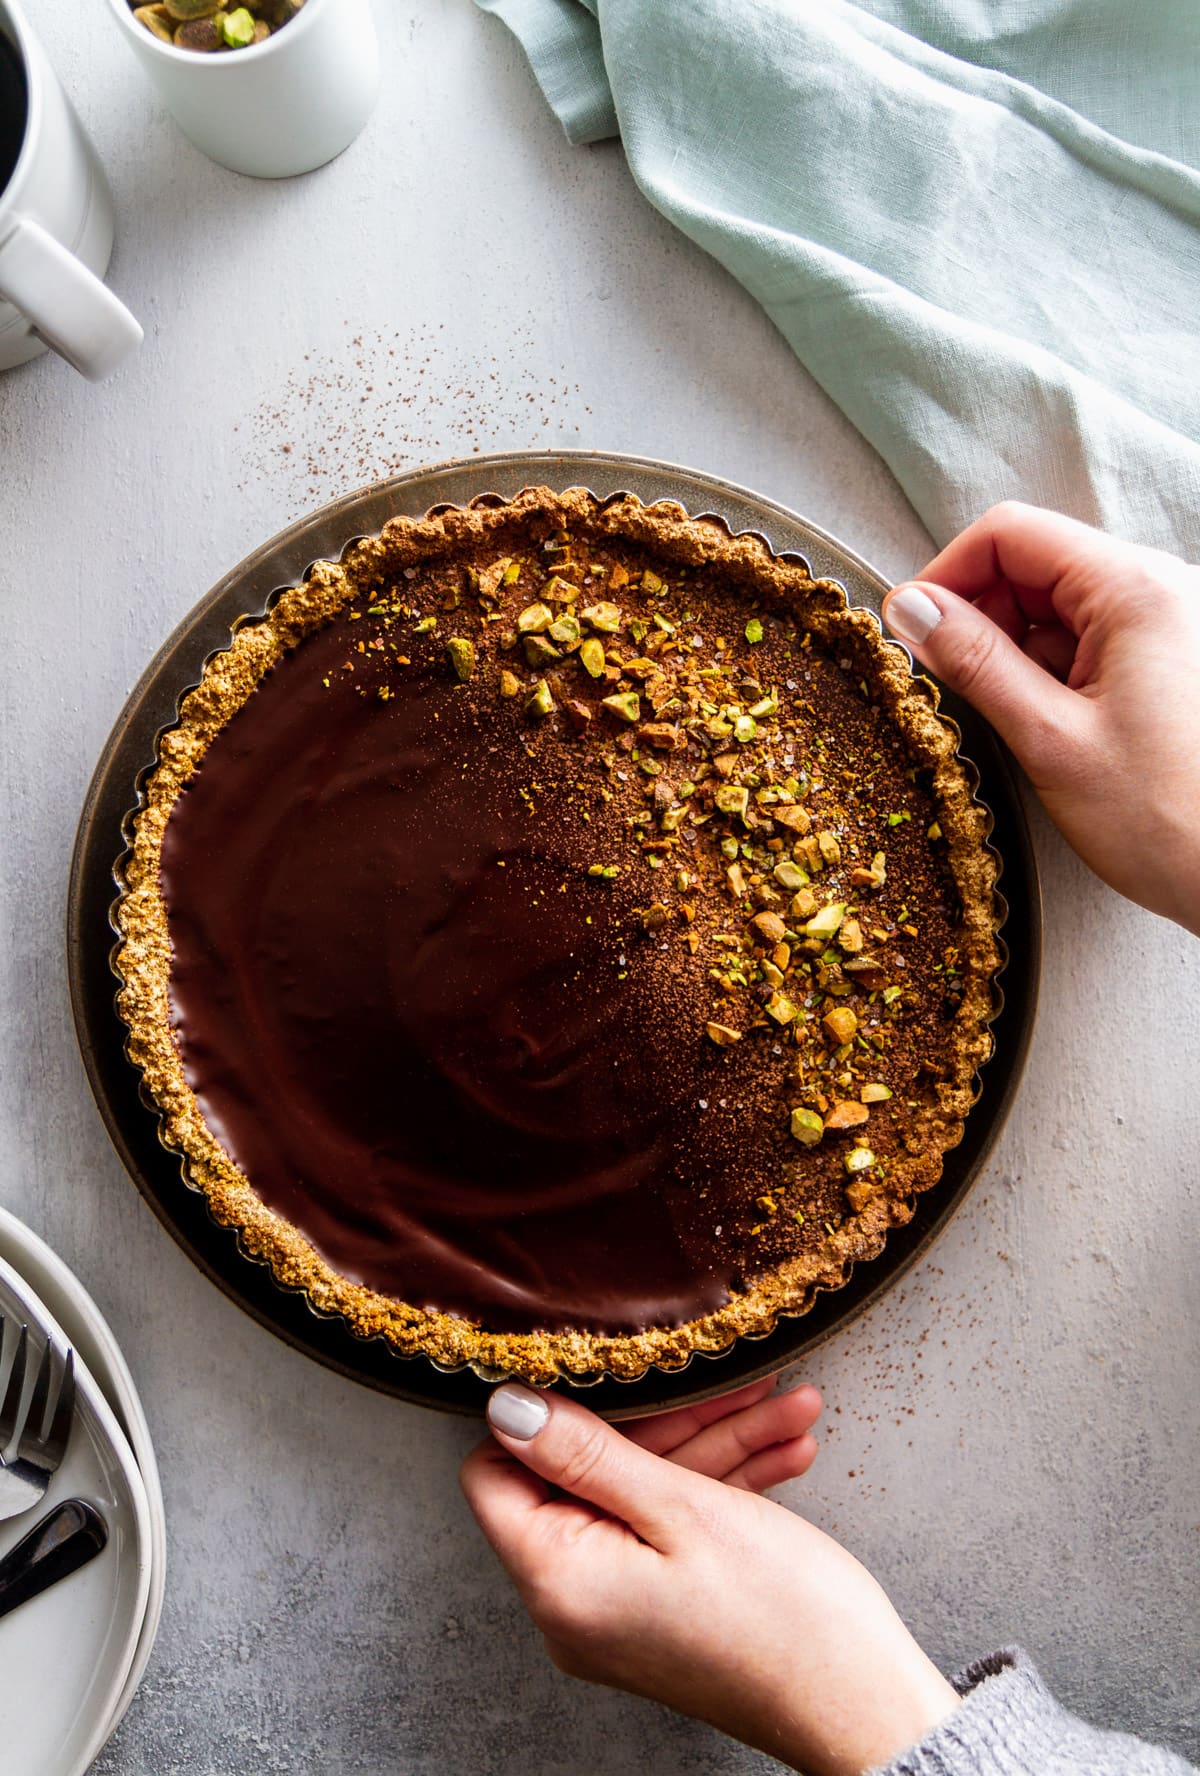 hands placing a chocolate tart on a surface